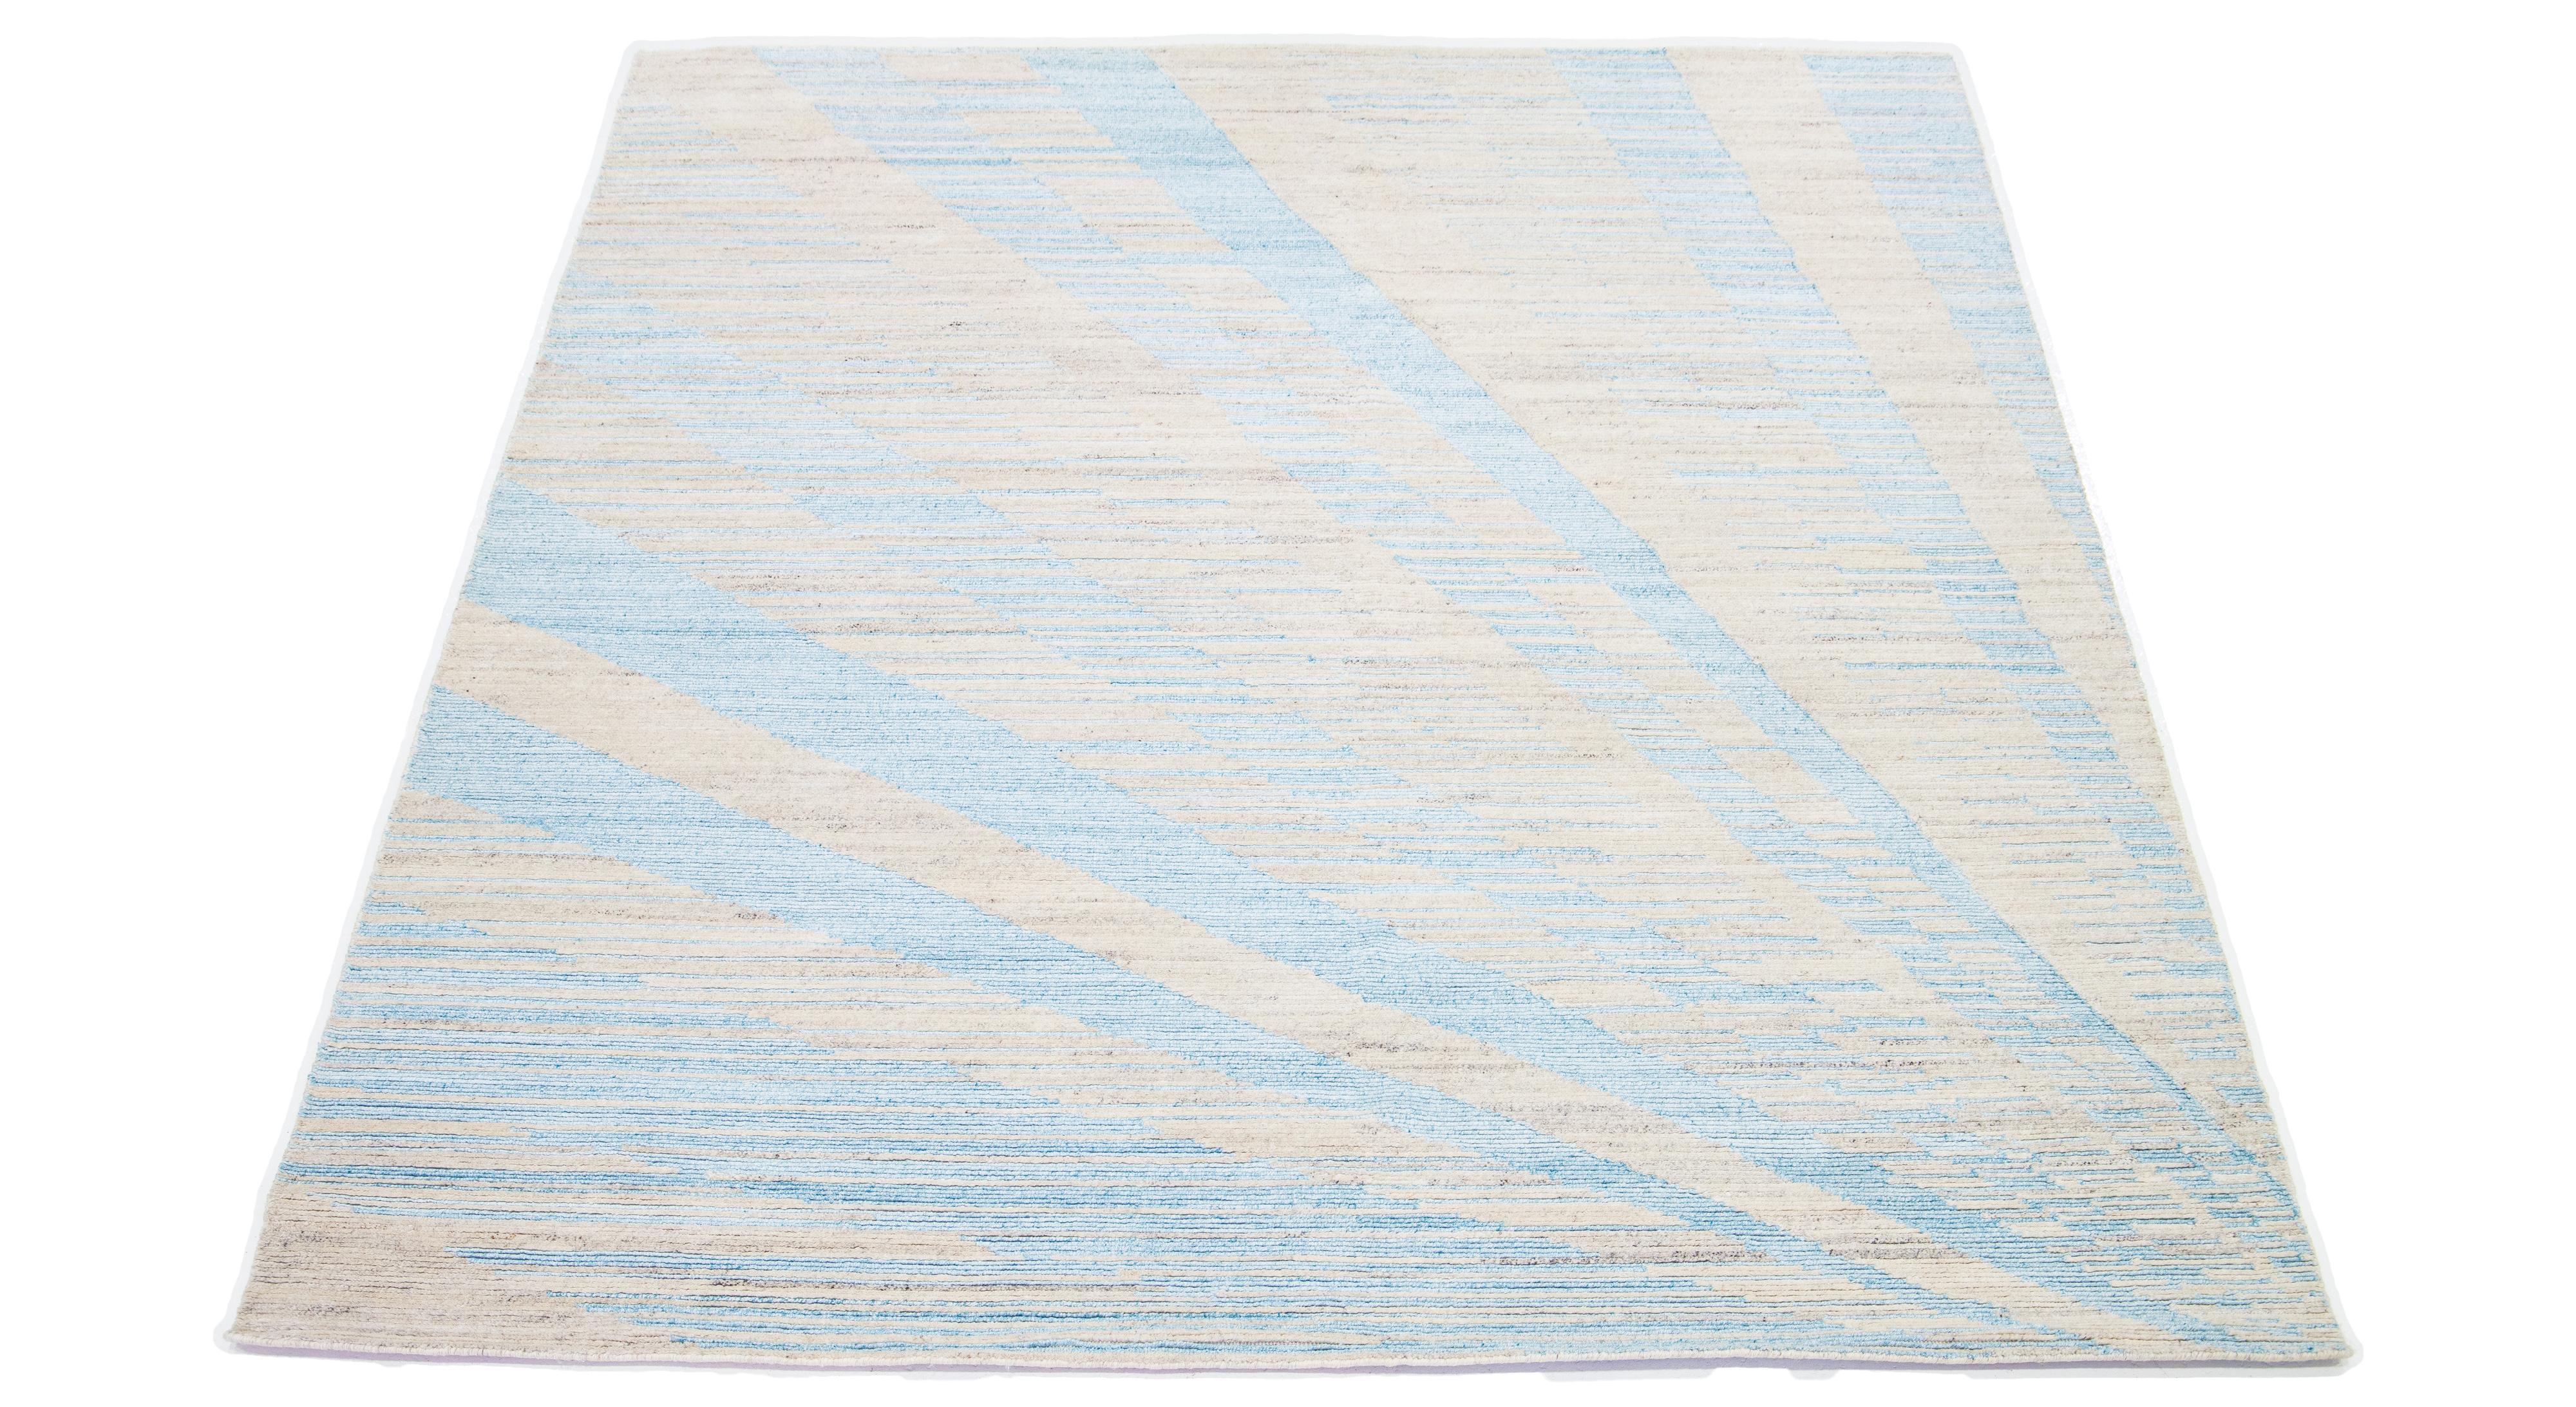 The contemporary art deco wool rug features a captivating abstract beige backdrop with elegant blue embellishments. The exquisitely crafted all-over pattern exudes the essence of modernism, epitomizing its significance in the 21st century.

This rug